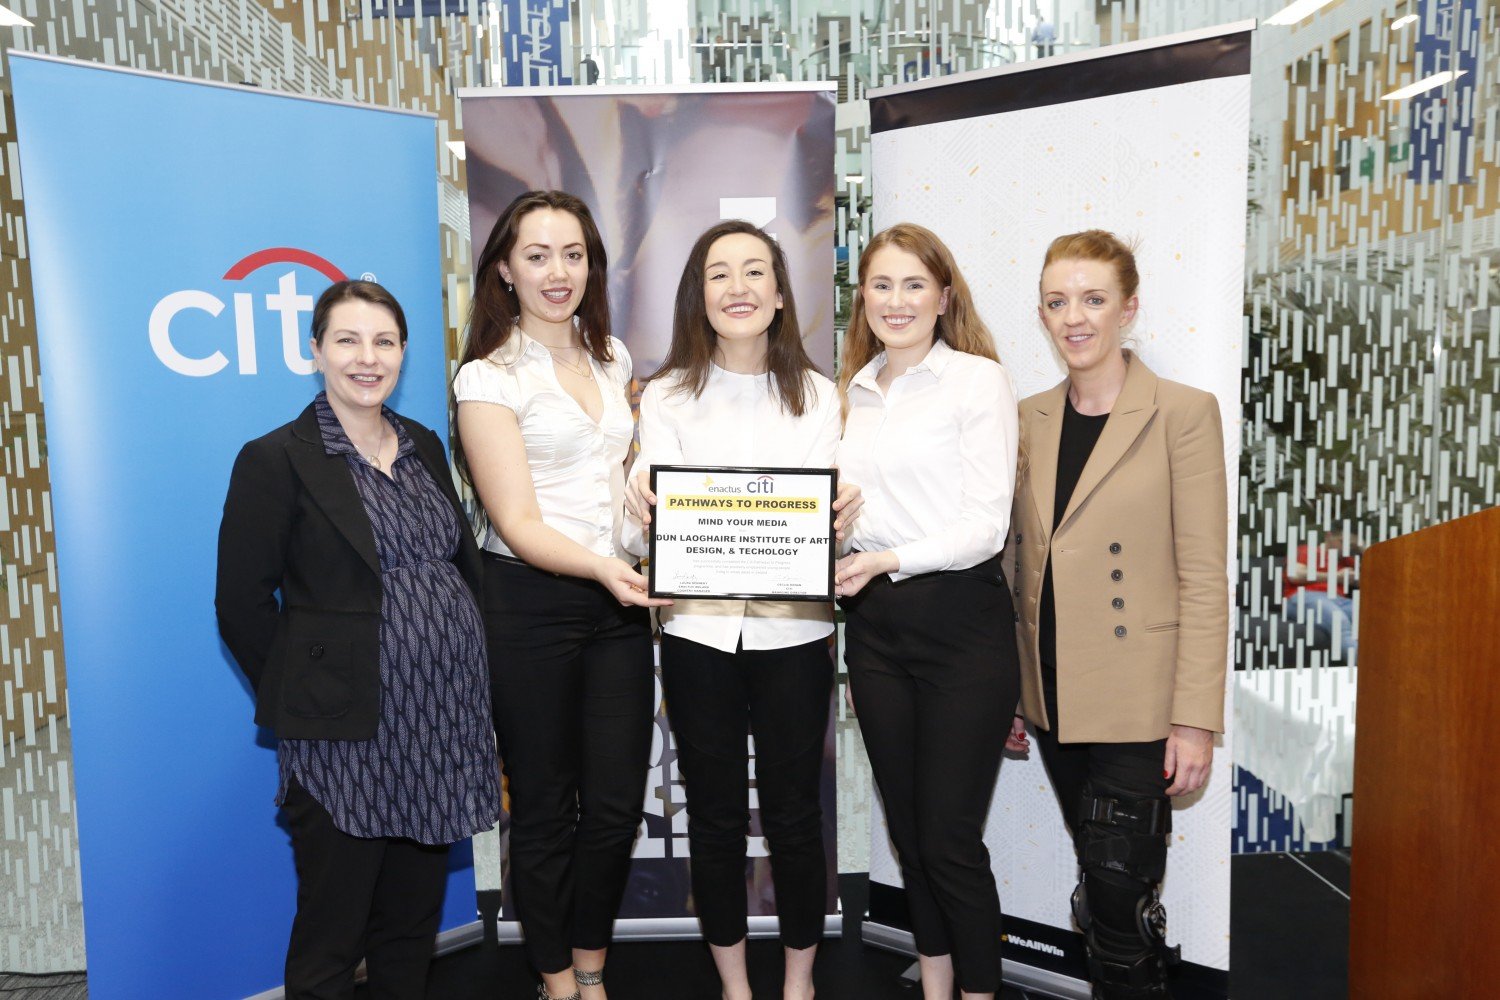 Laura Dennehy Country Manager of Enactus Ireland and Emma Hynes Head of Public Affairs from Citi Ireland presenting the students with their certificate